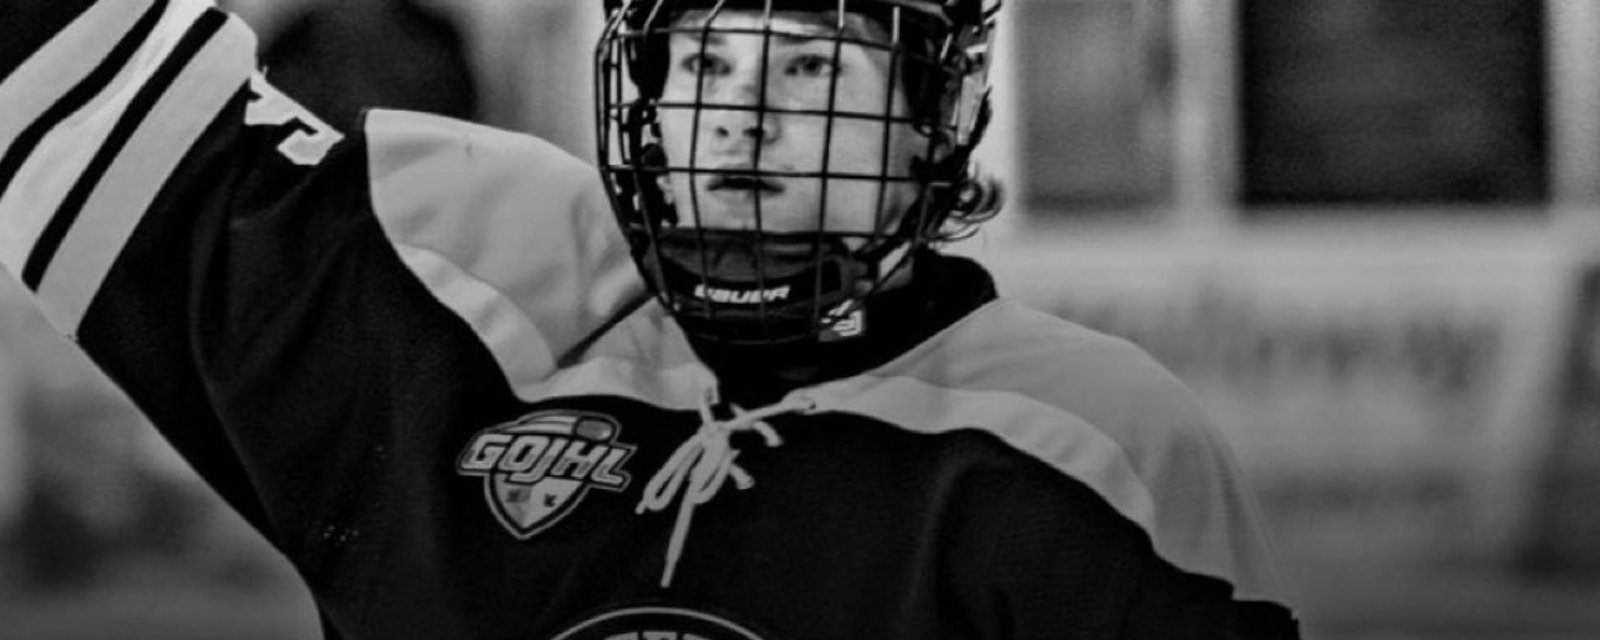 Hockey world mourns 18-year-old player’s sudden death